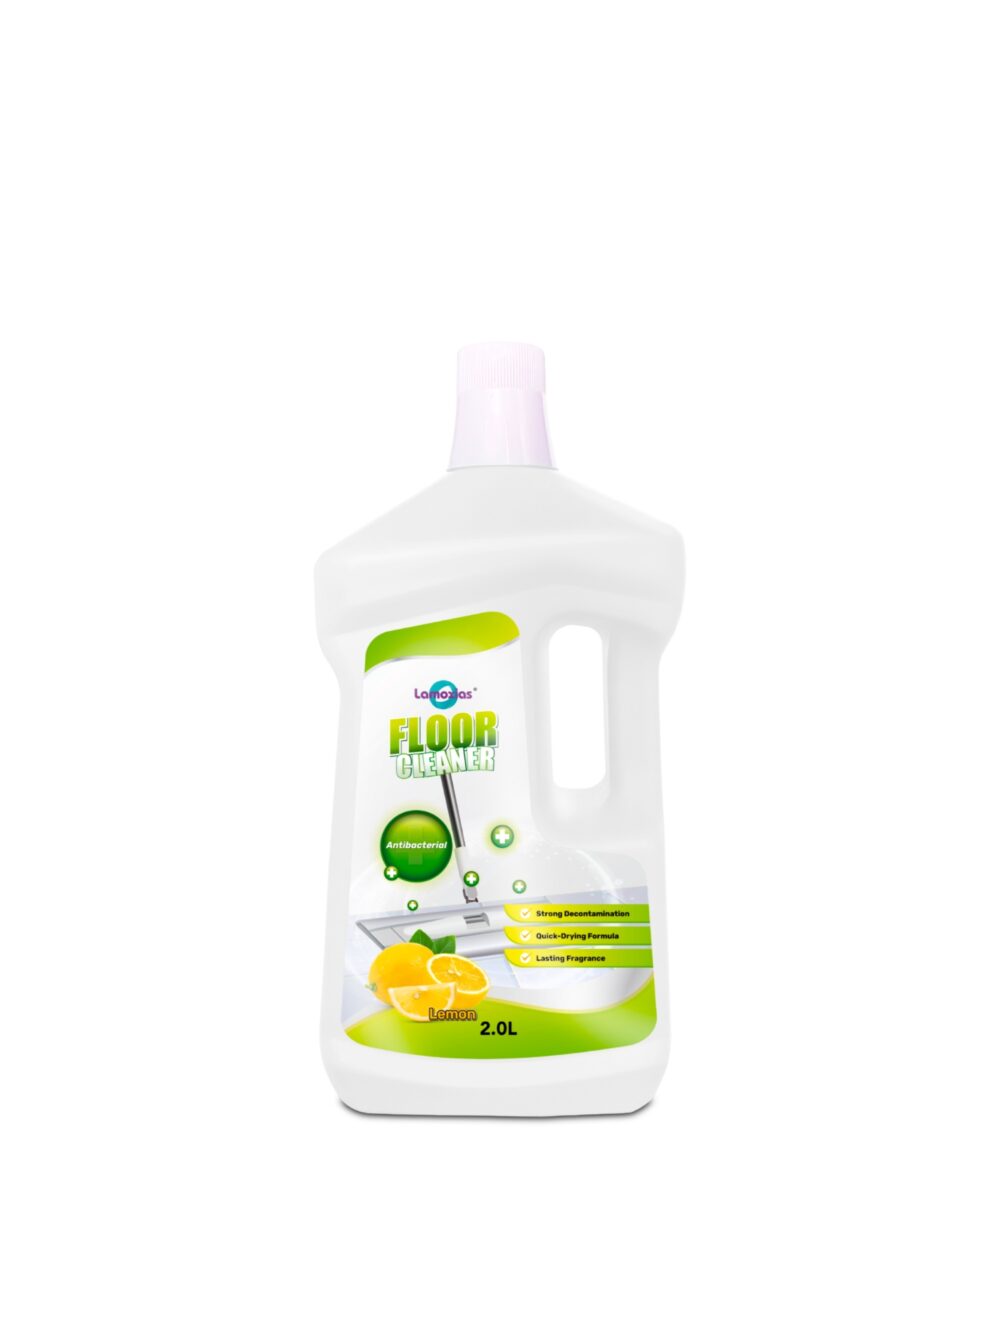 The Floor Cleaner packed with Lemon Freshness. Cleans and degreases floors with just one wipe